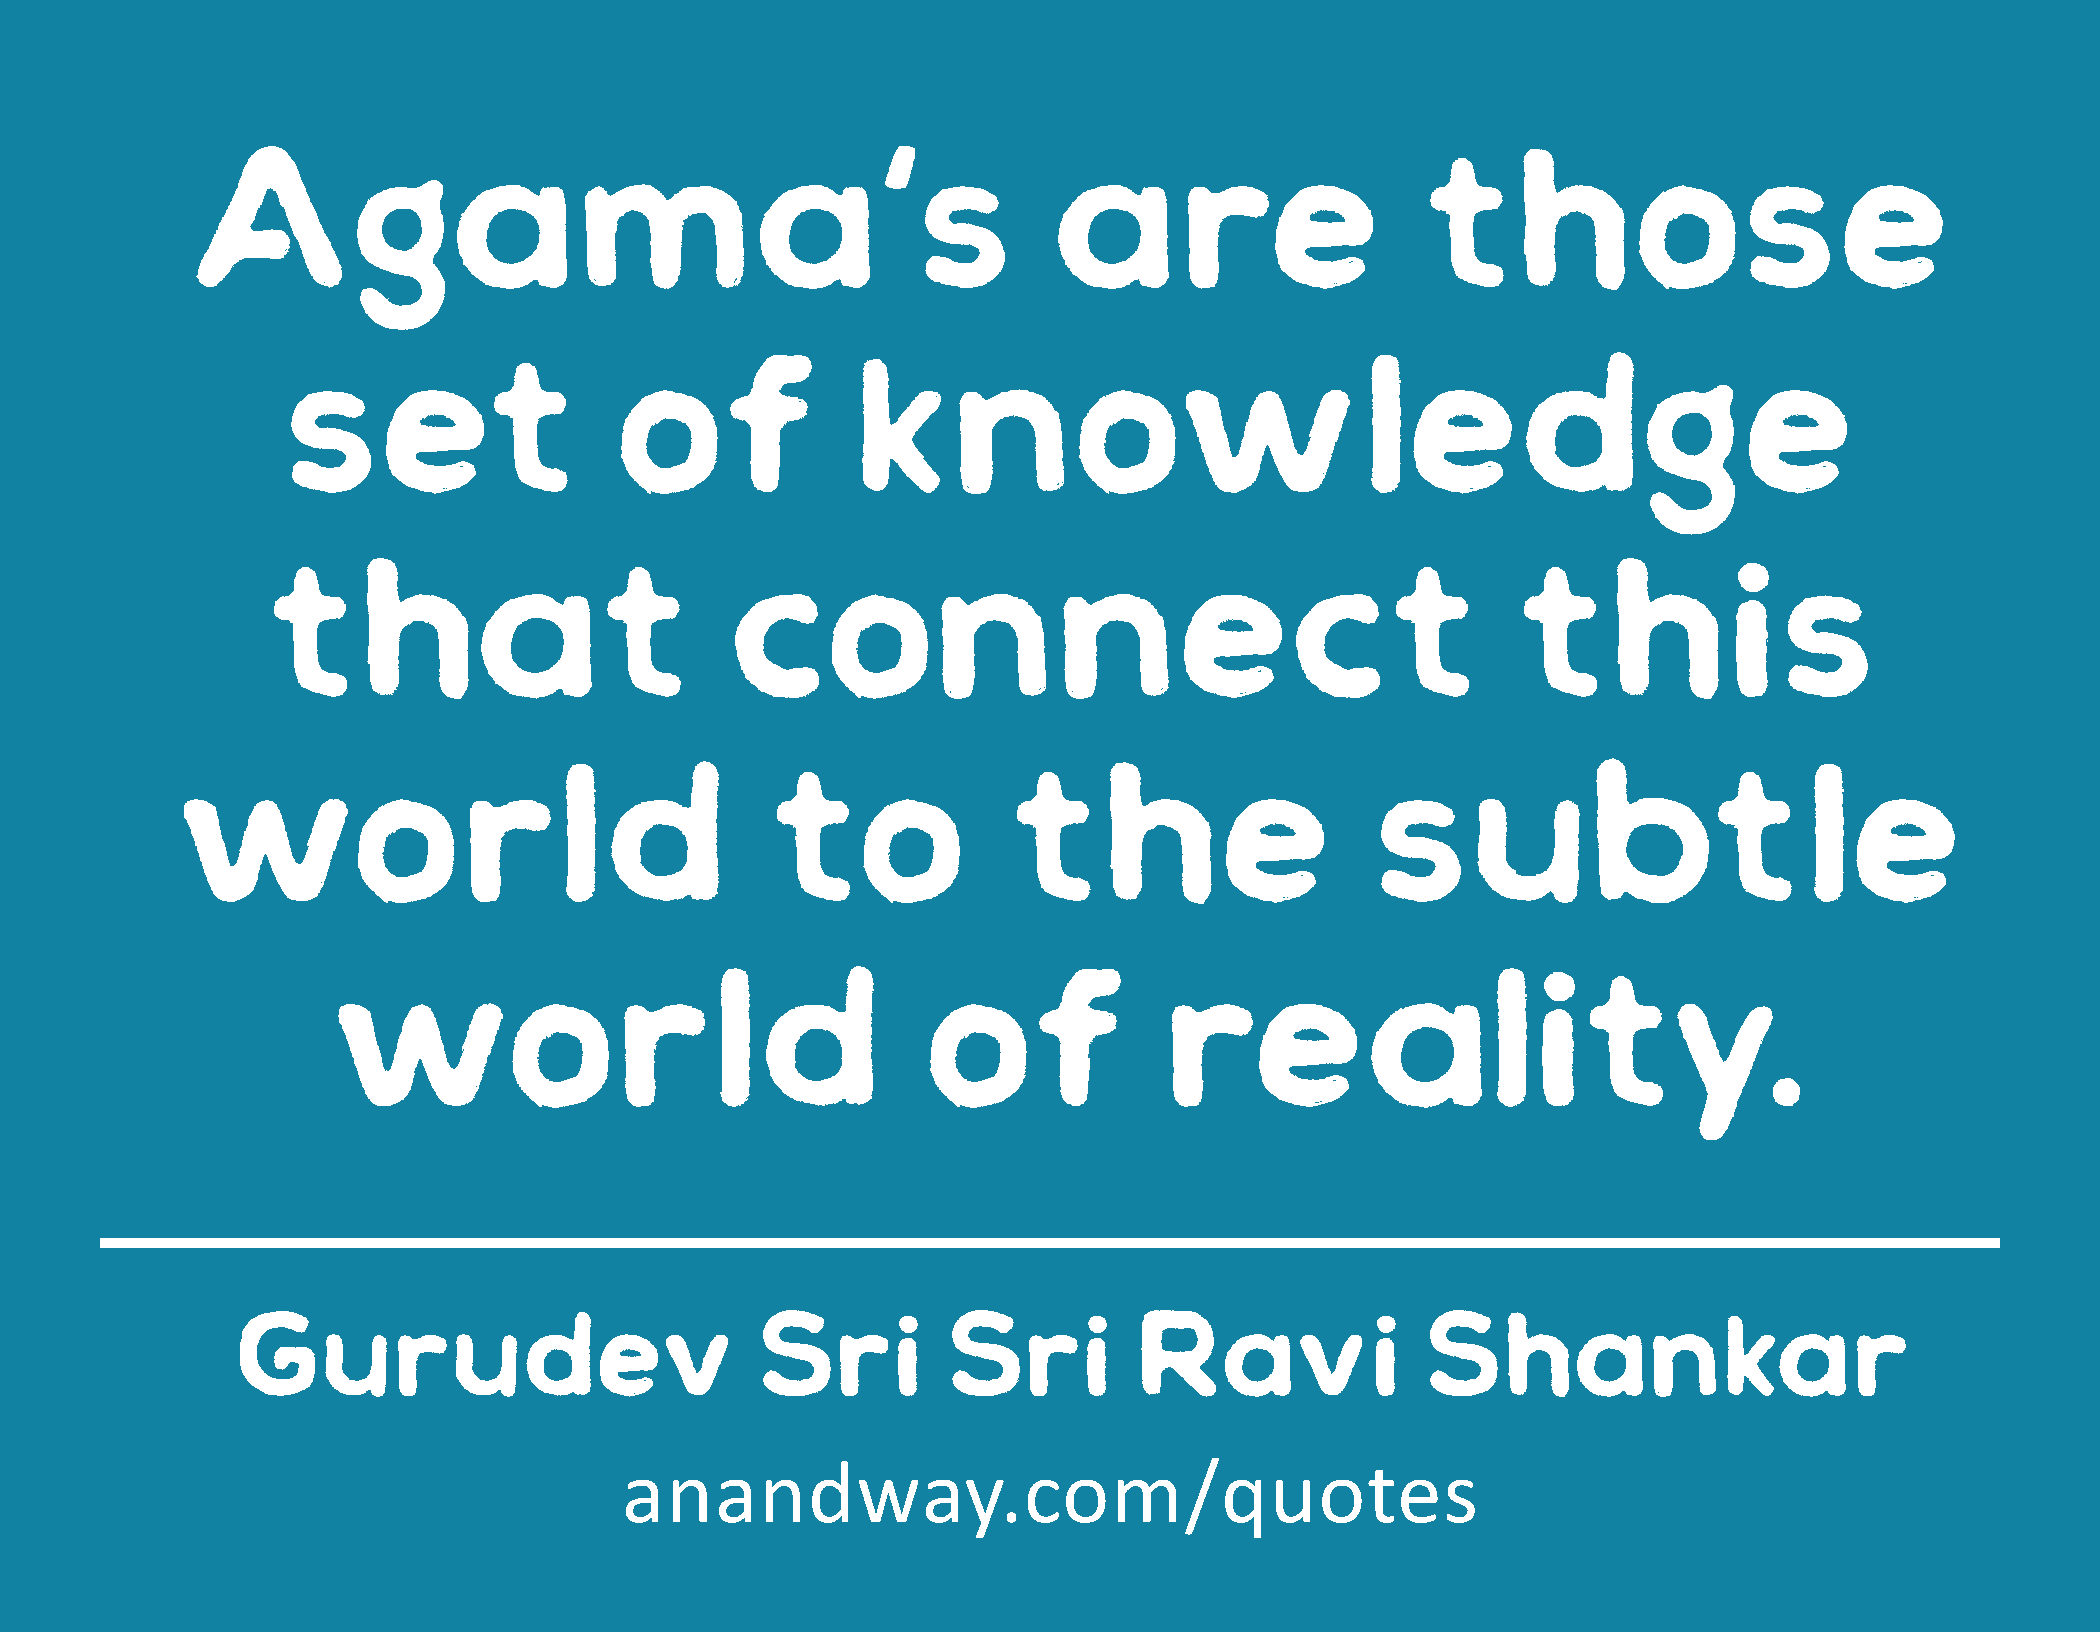 Agama's are those set of knowledge that connect this world to the subtle world of reality. 
 -Gurudev Sri Sri Ravi Shankar